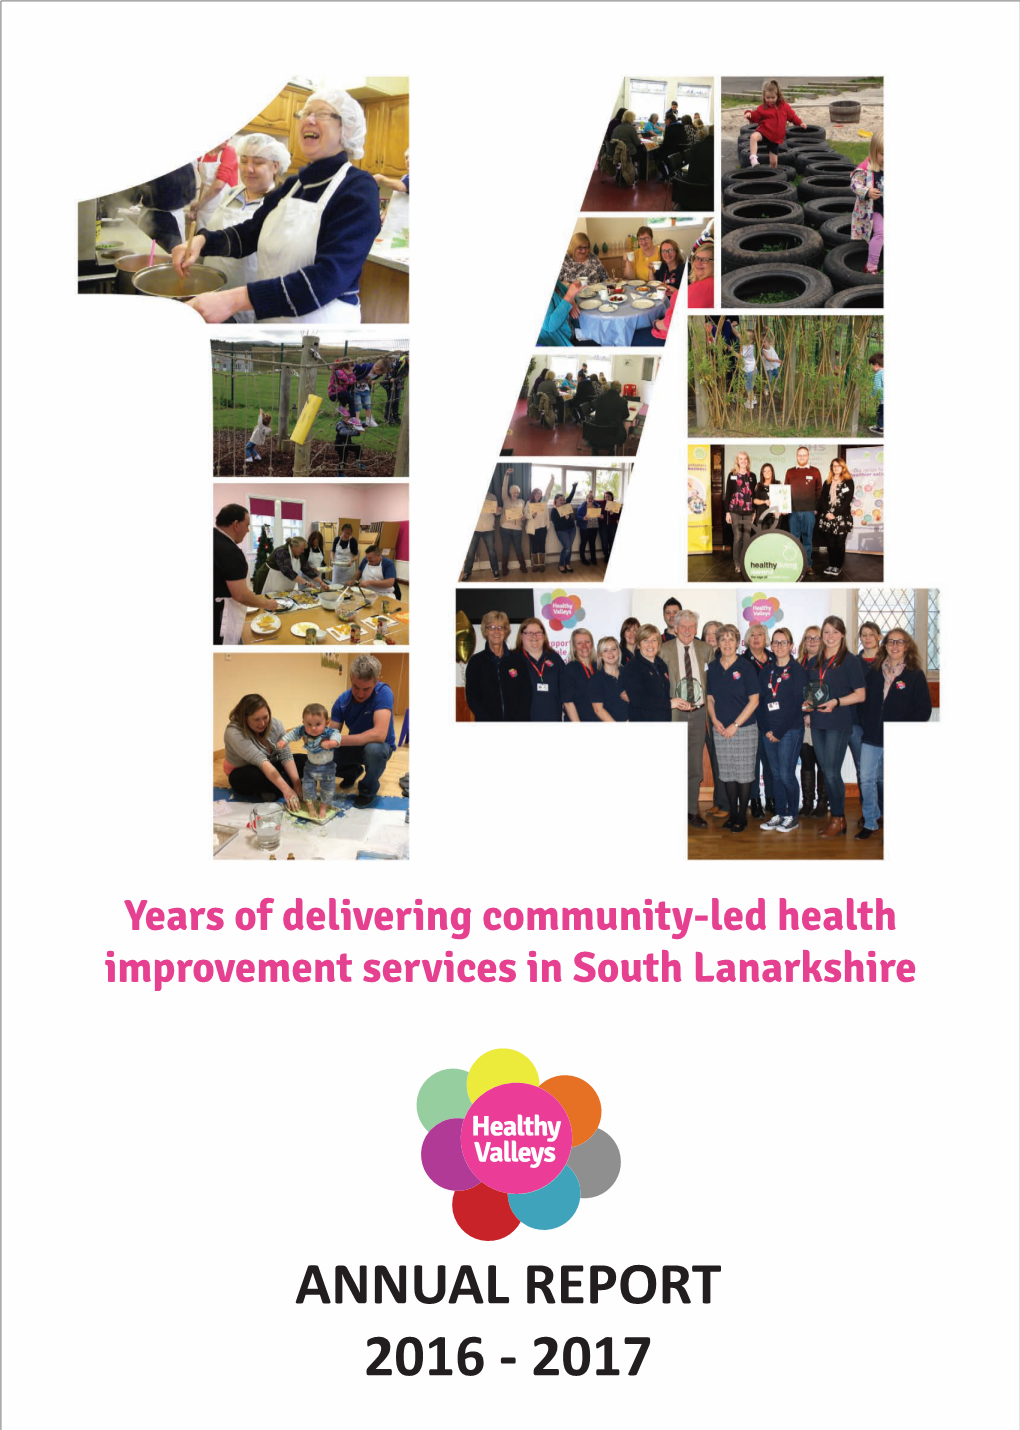 Healthy Valleys Annual Report 2016-2017